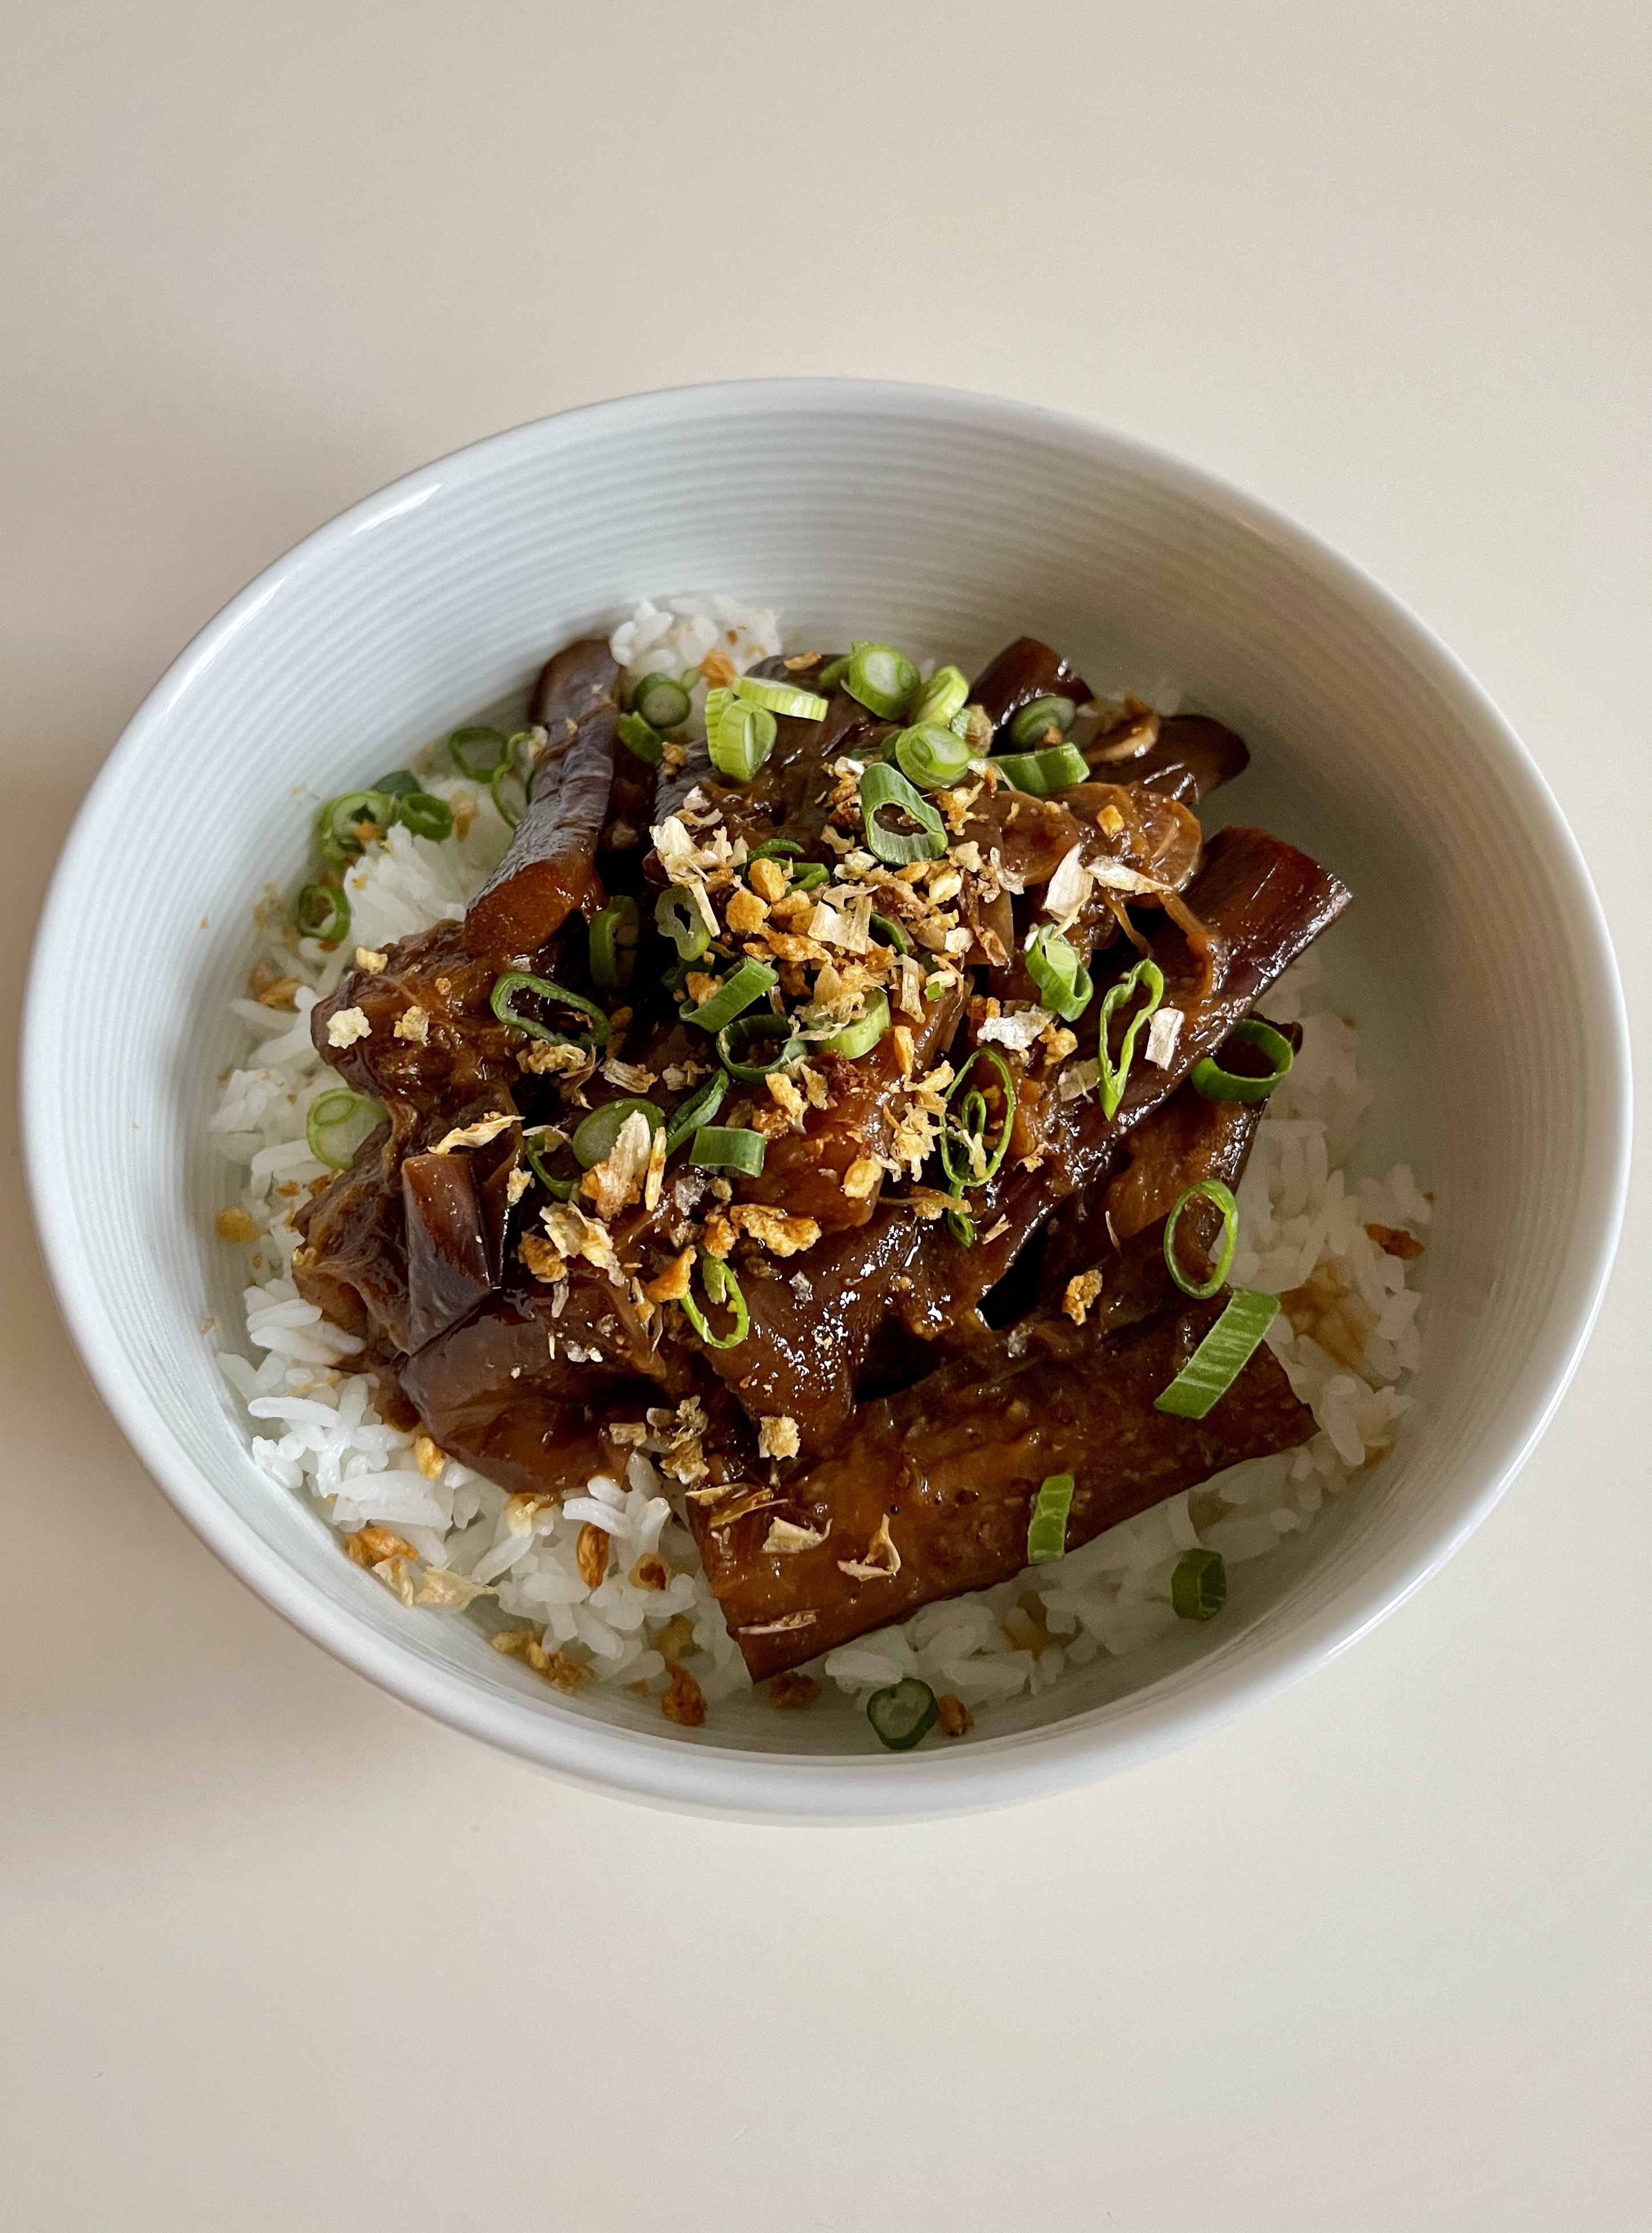 A bowl of eggplant adobo over white rice.